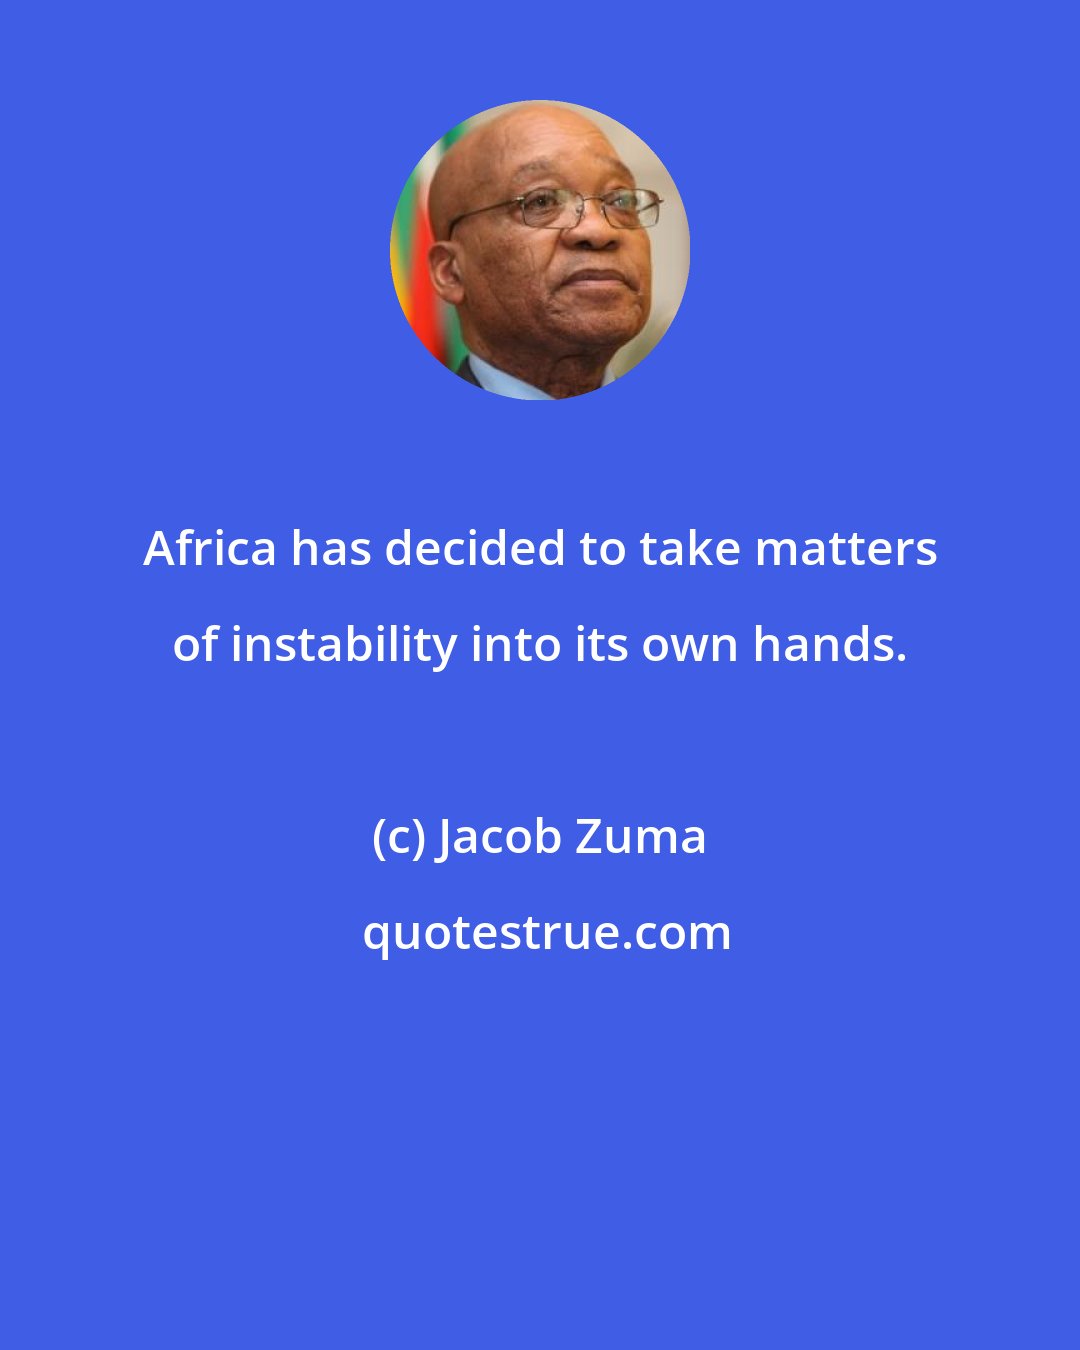 Jacob Zuma: Africa has decided to take matters of instability into its own hands.